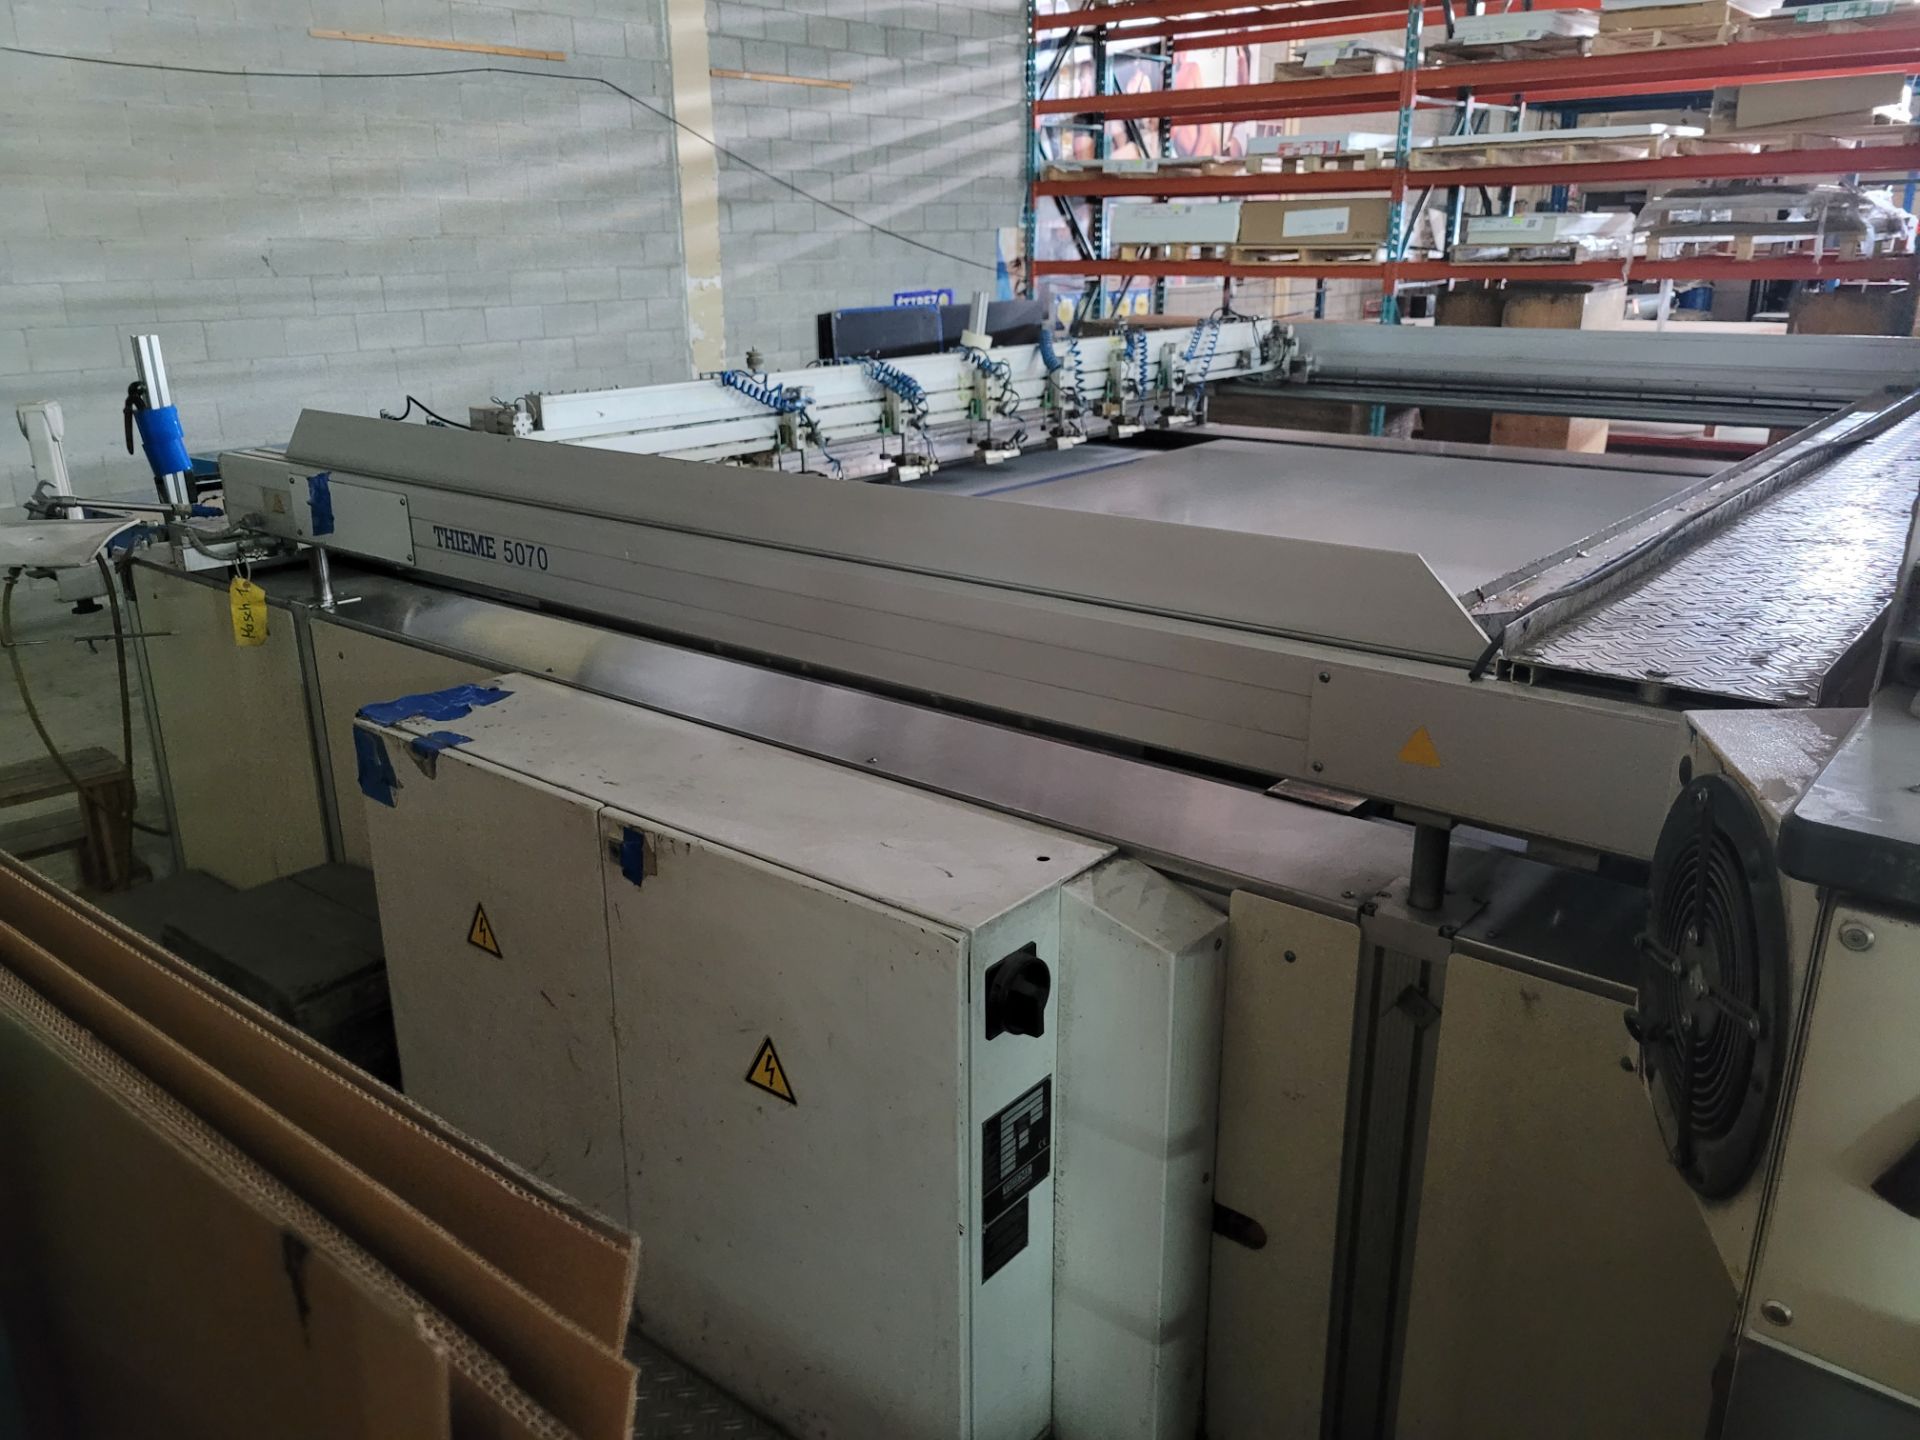 Section THIEME 5070 Line - Included components pictured - Screen-Printing Units, UV Dryer, Digital C - Image 12 of 17